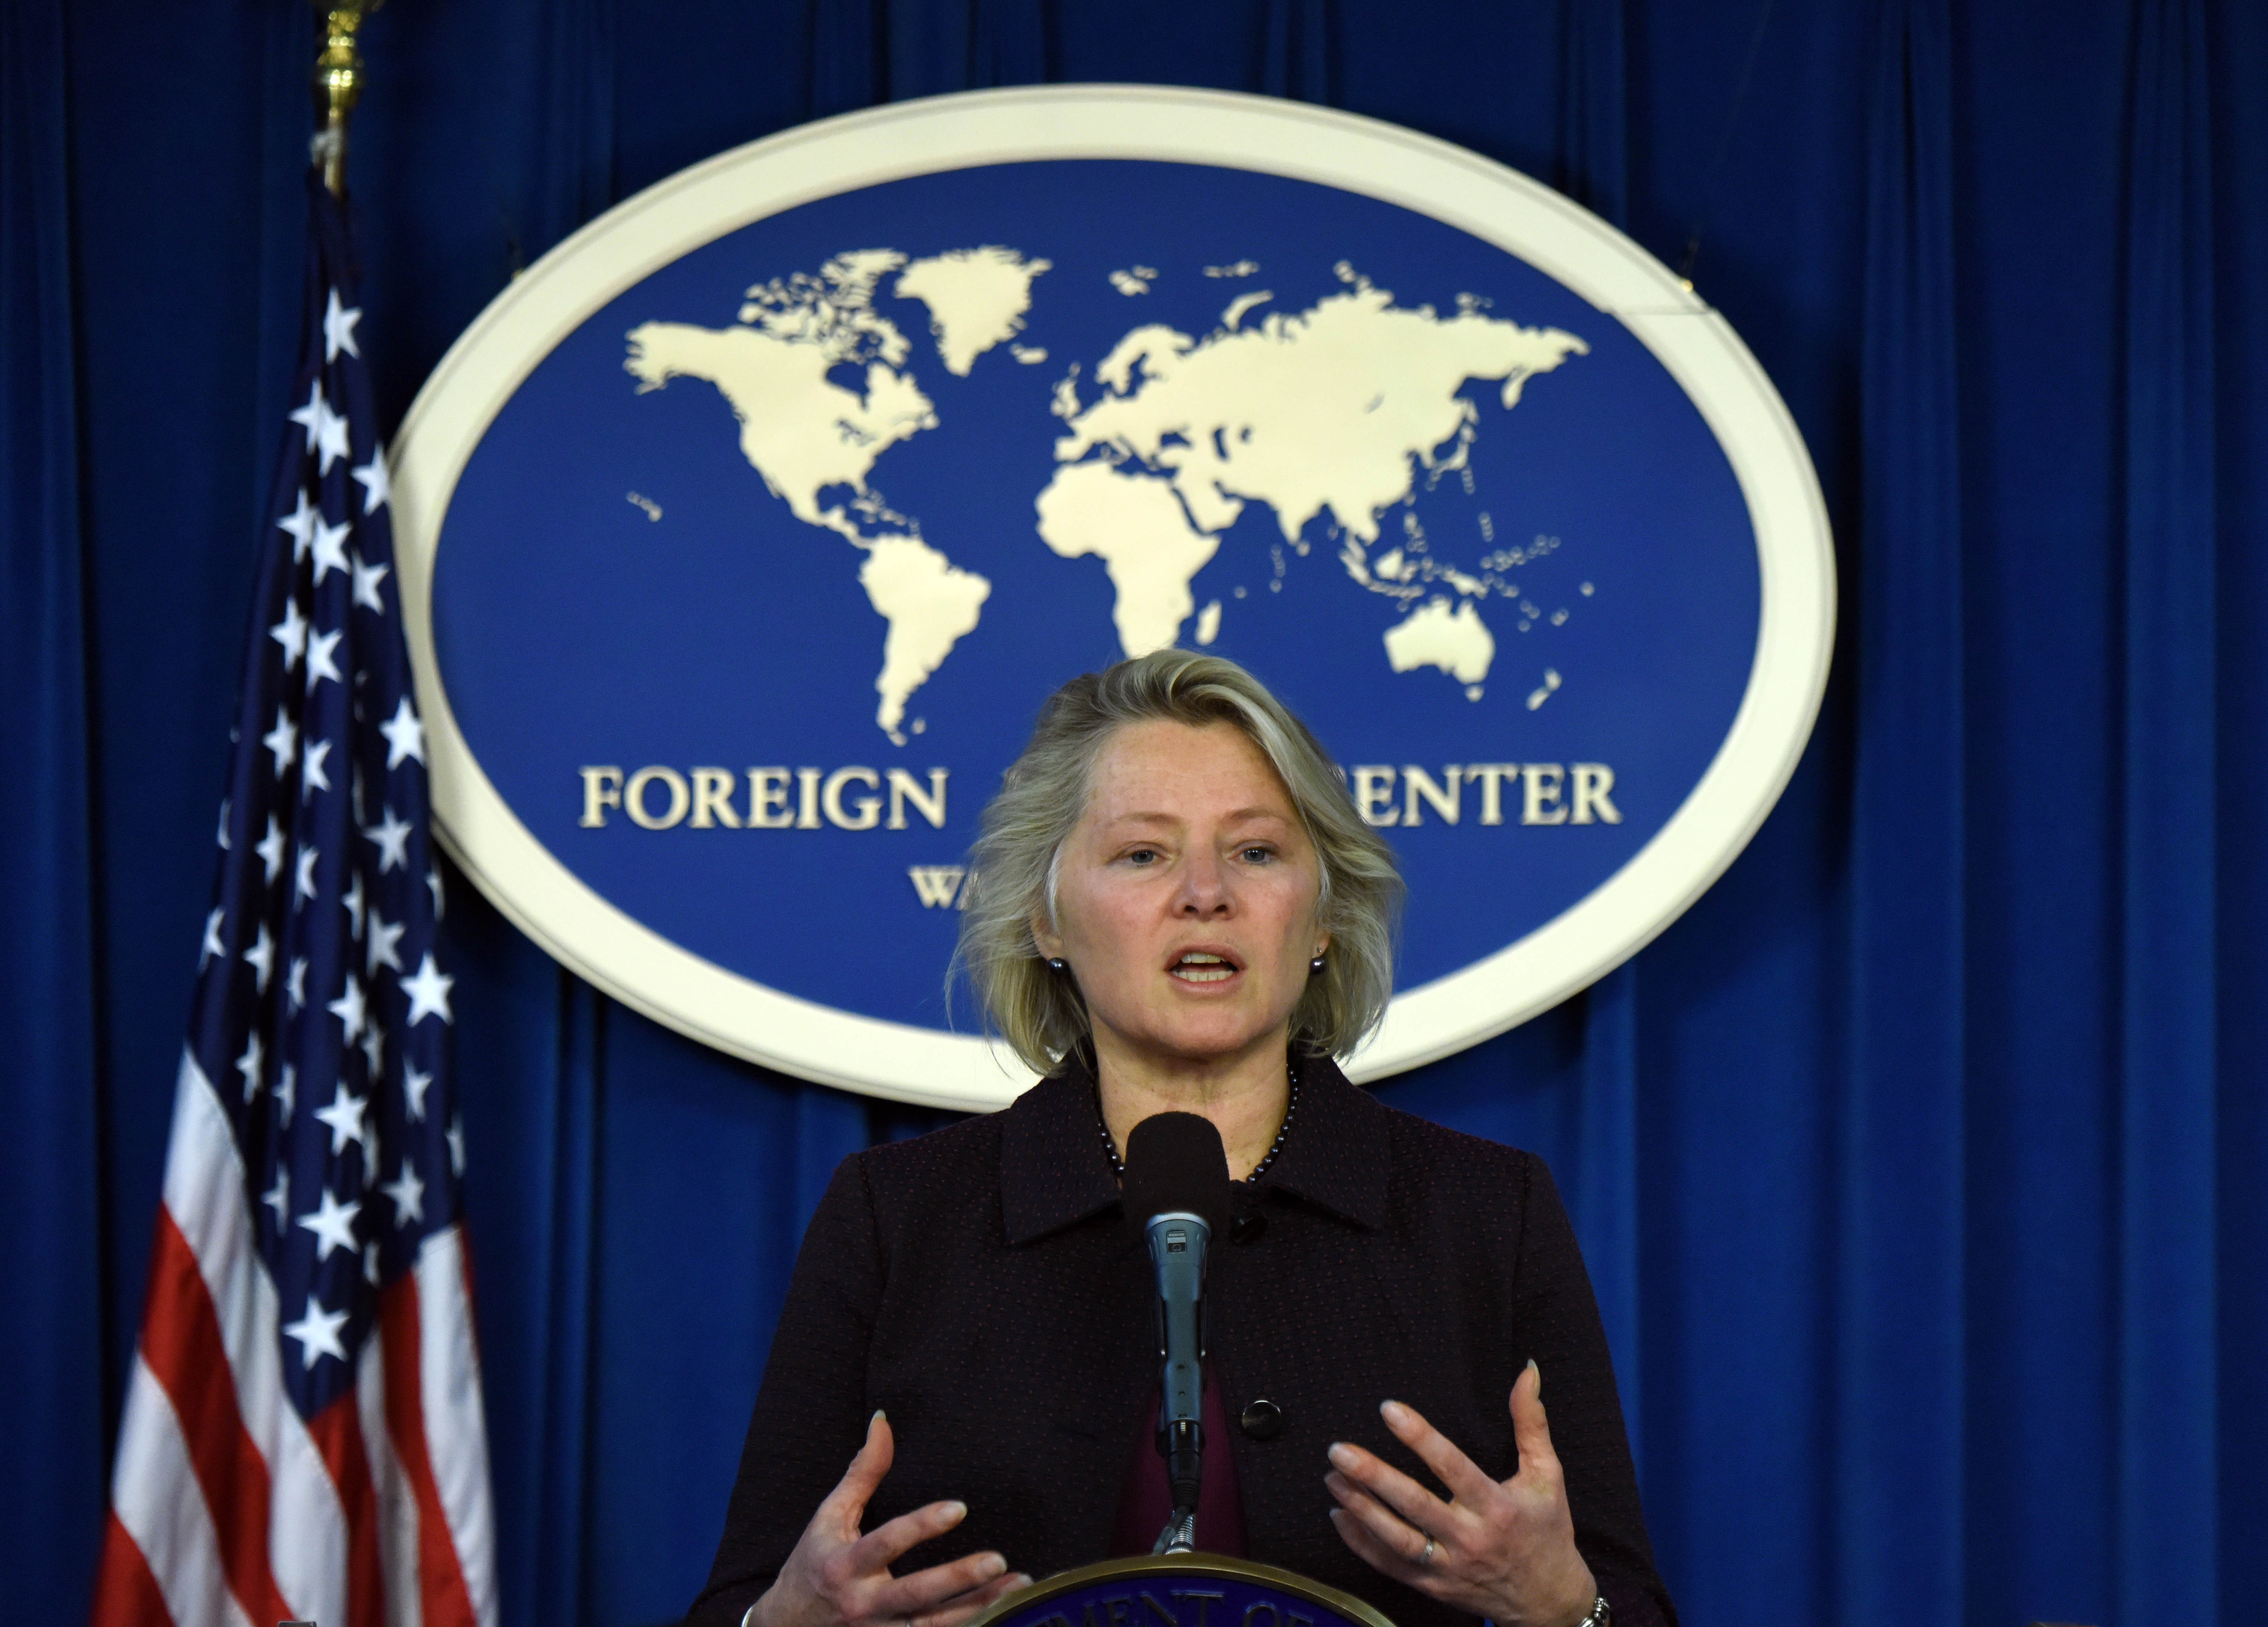 Susan Thornton, shown in March 2017 when she was acting US assistant secretary of state, says that recent talks with Chinese leaders suggest they are pessimistic about resolving issues with the US any time soon. Photo: Xinhua